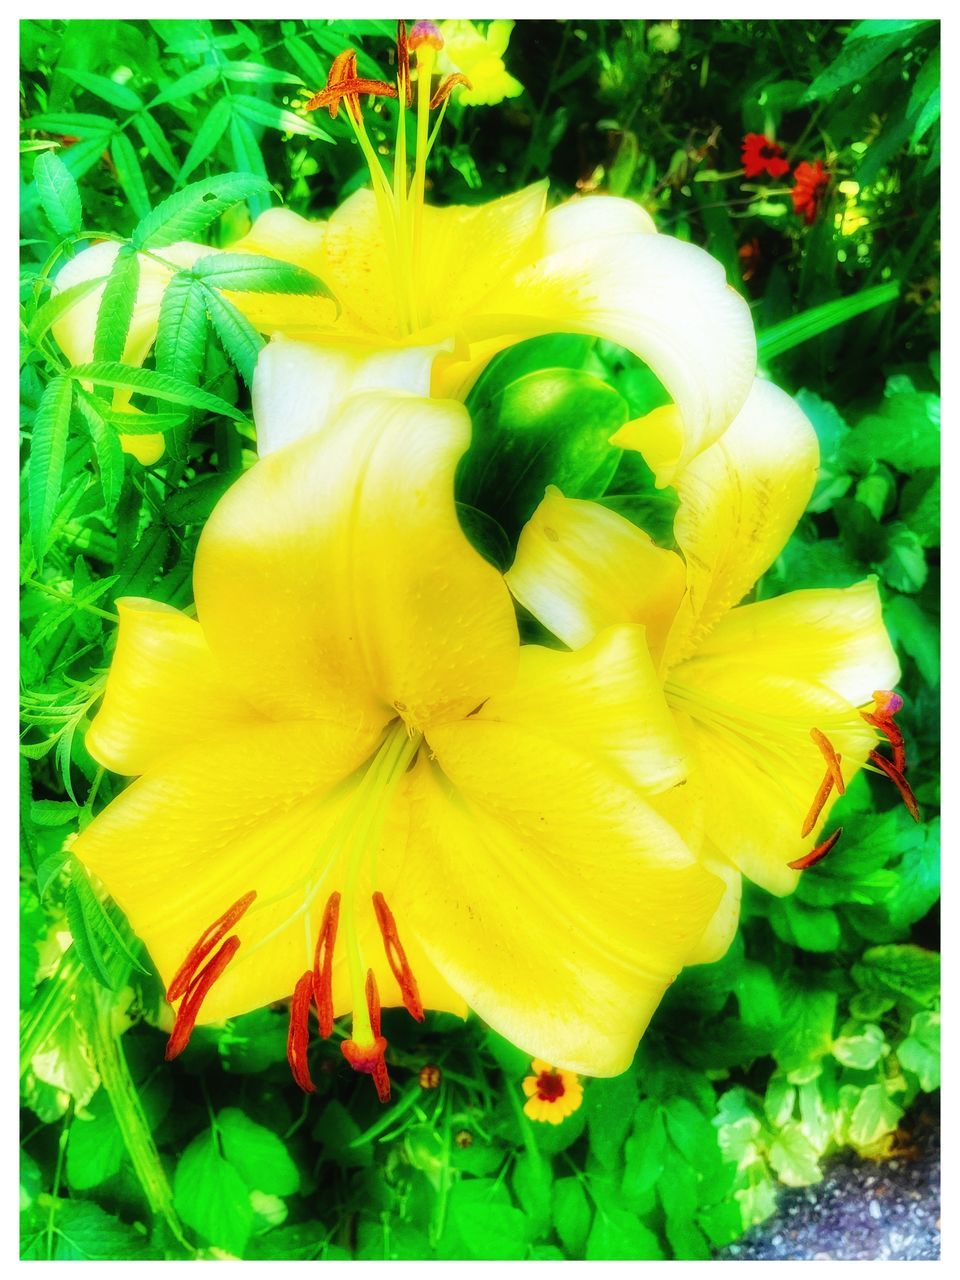 plant, flower, flowering plant, freshness, yellow, growth, flower head, inflorescence, transfer print, petal, fragility, auto post production filter, beauty in nature, nature, close-up, green, no people, outdoors, day, daylily, blossom, vibrant color, botany, leaf, springtime, plant part